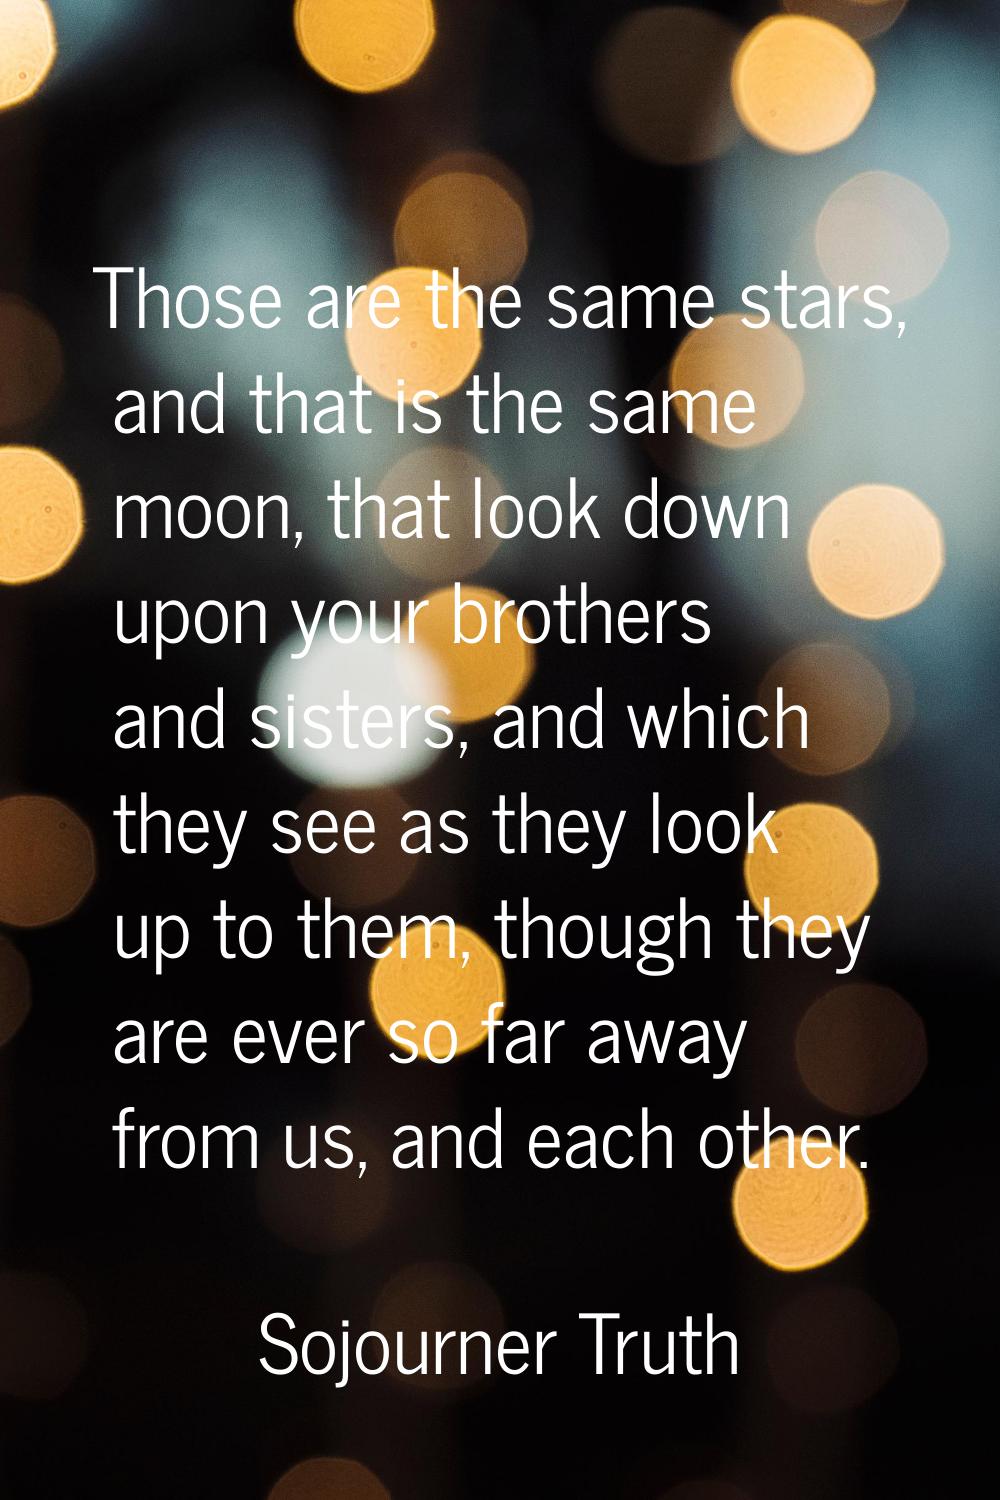 Those are the same stars, and that is the same moon, that look down upon your brothers and sisters,